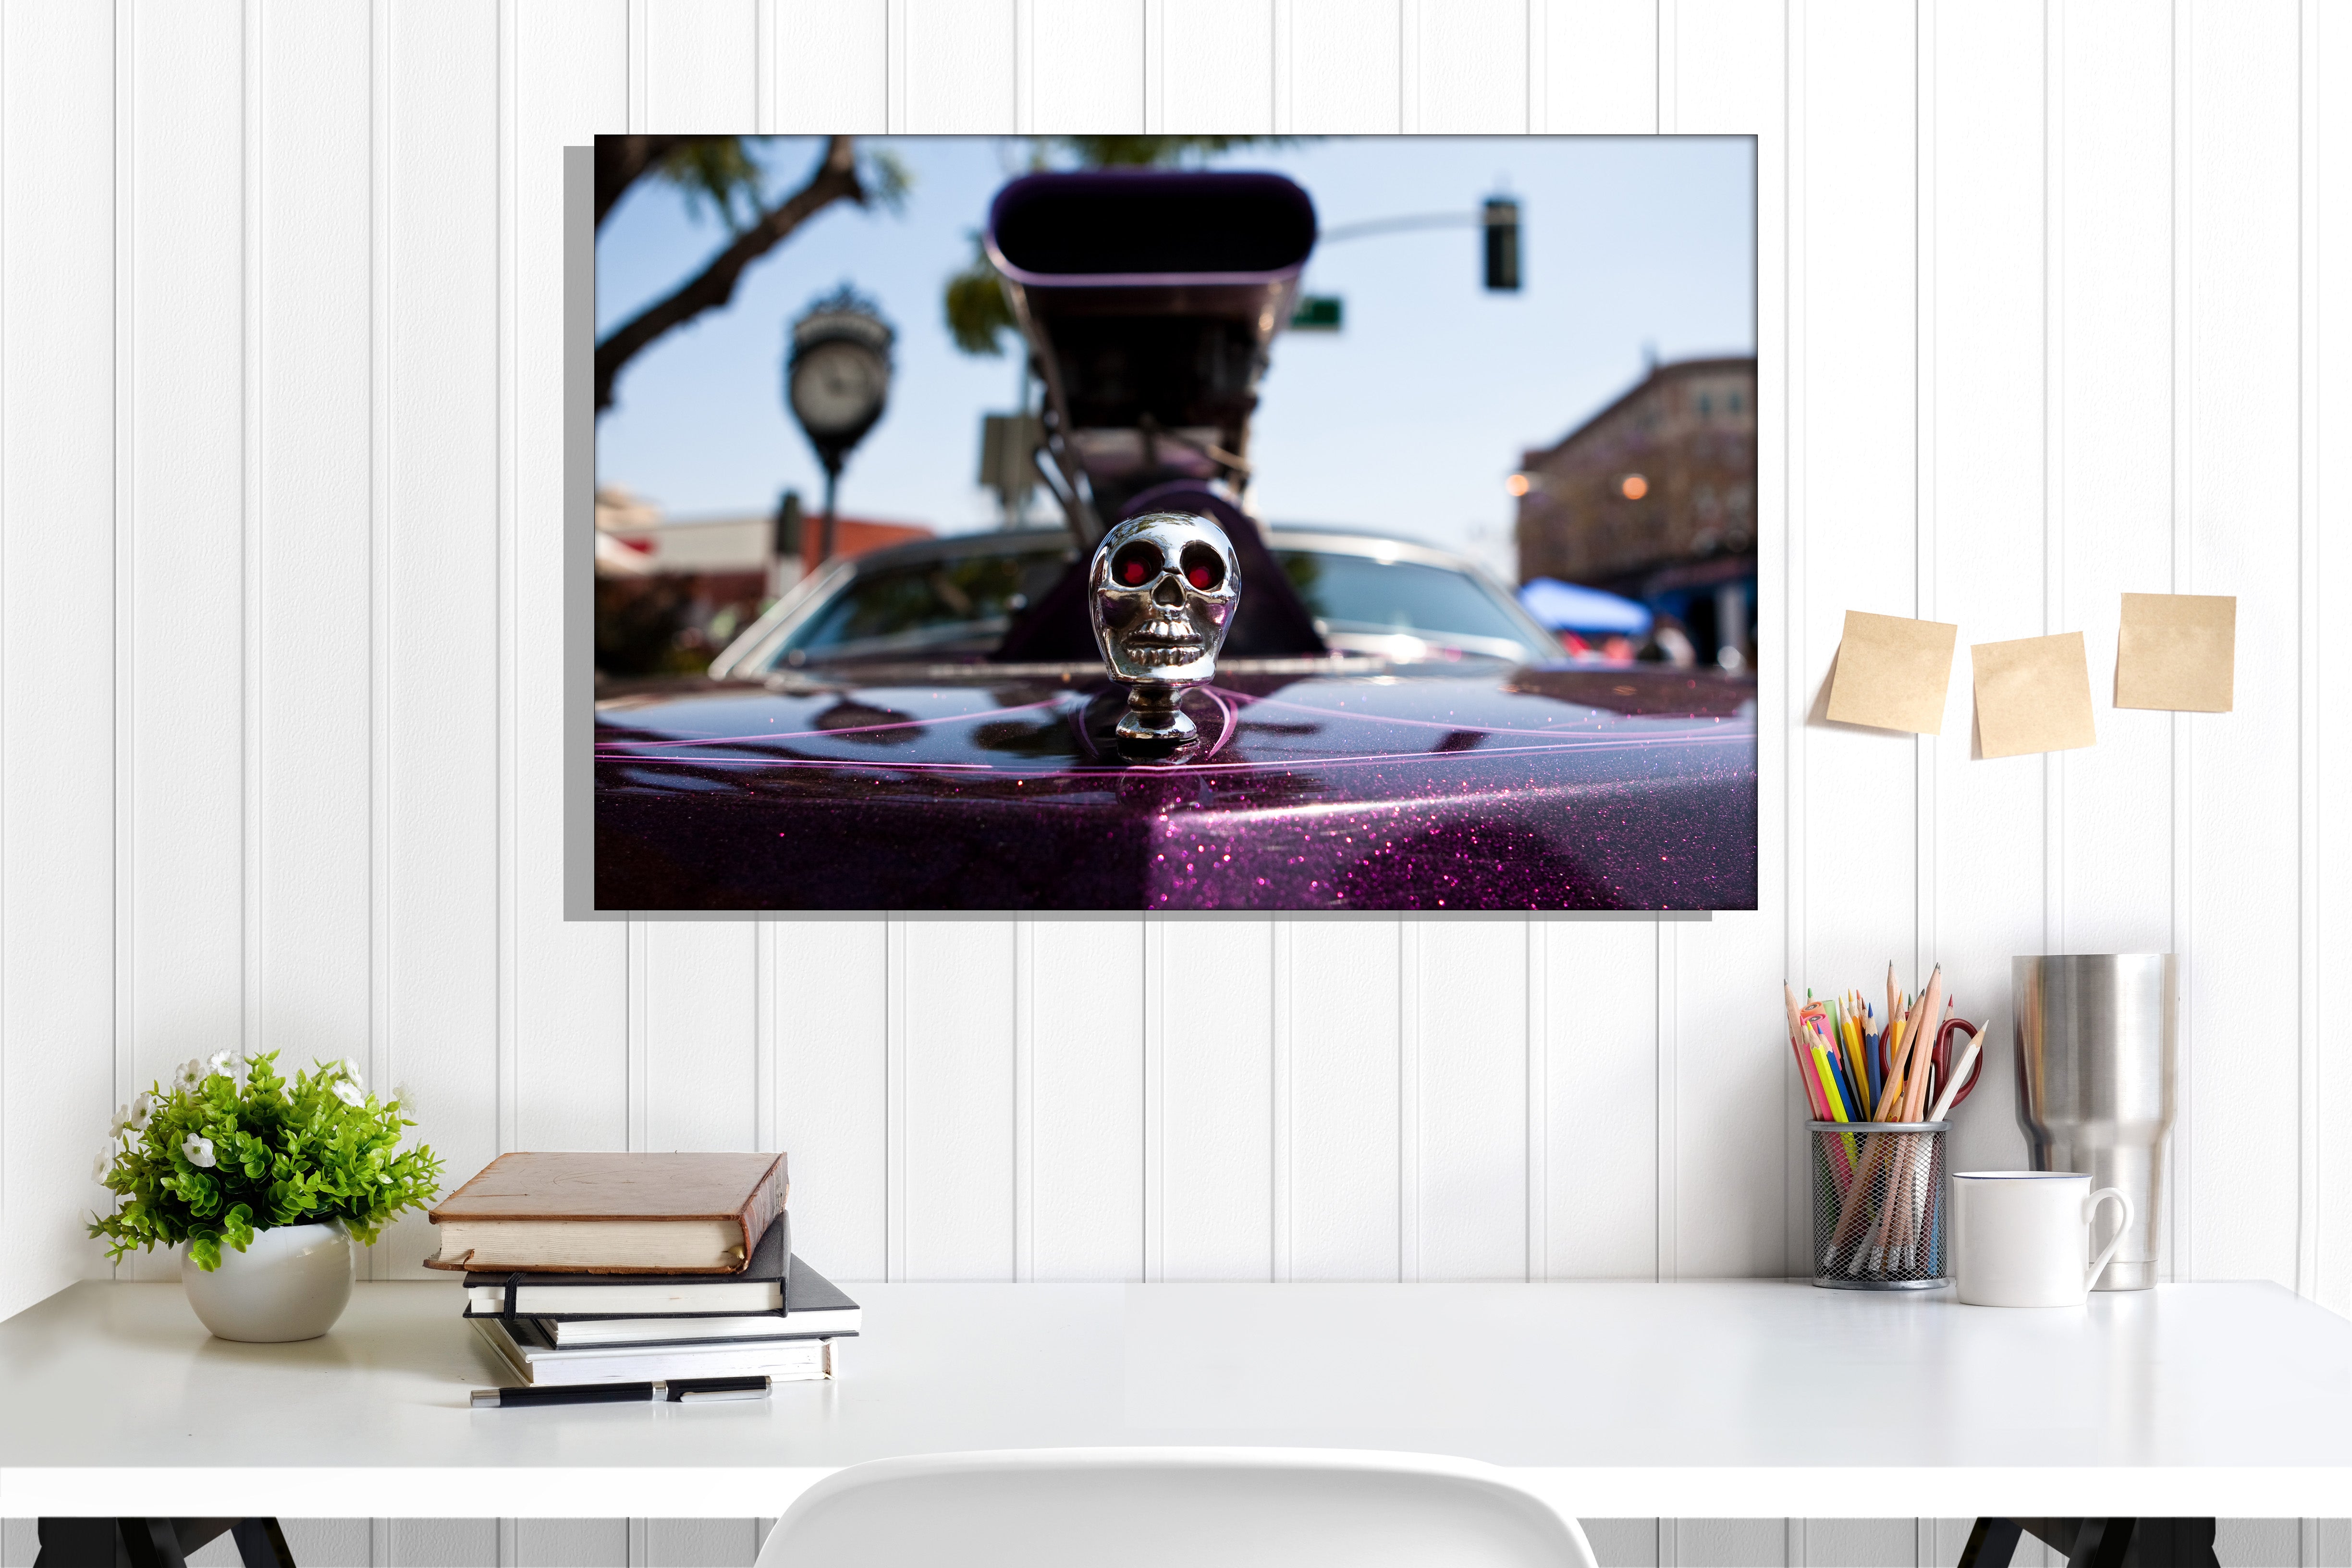 Hand-crafted Skull Hood Ornament Car Photography Print